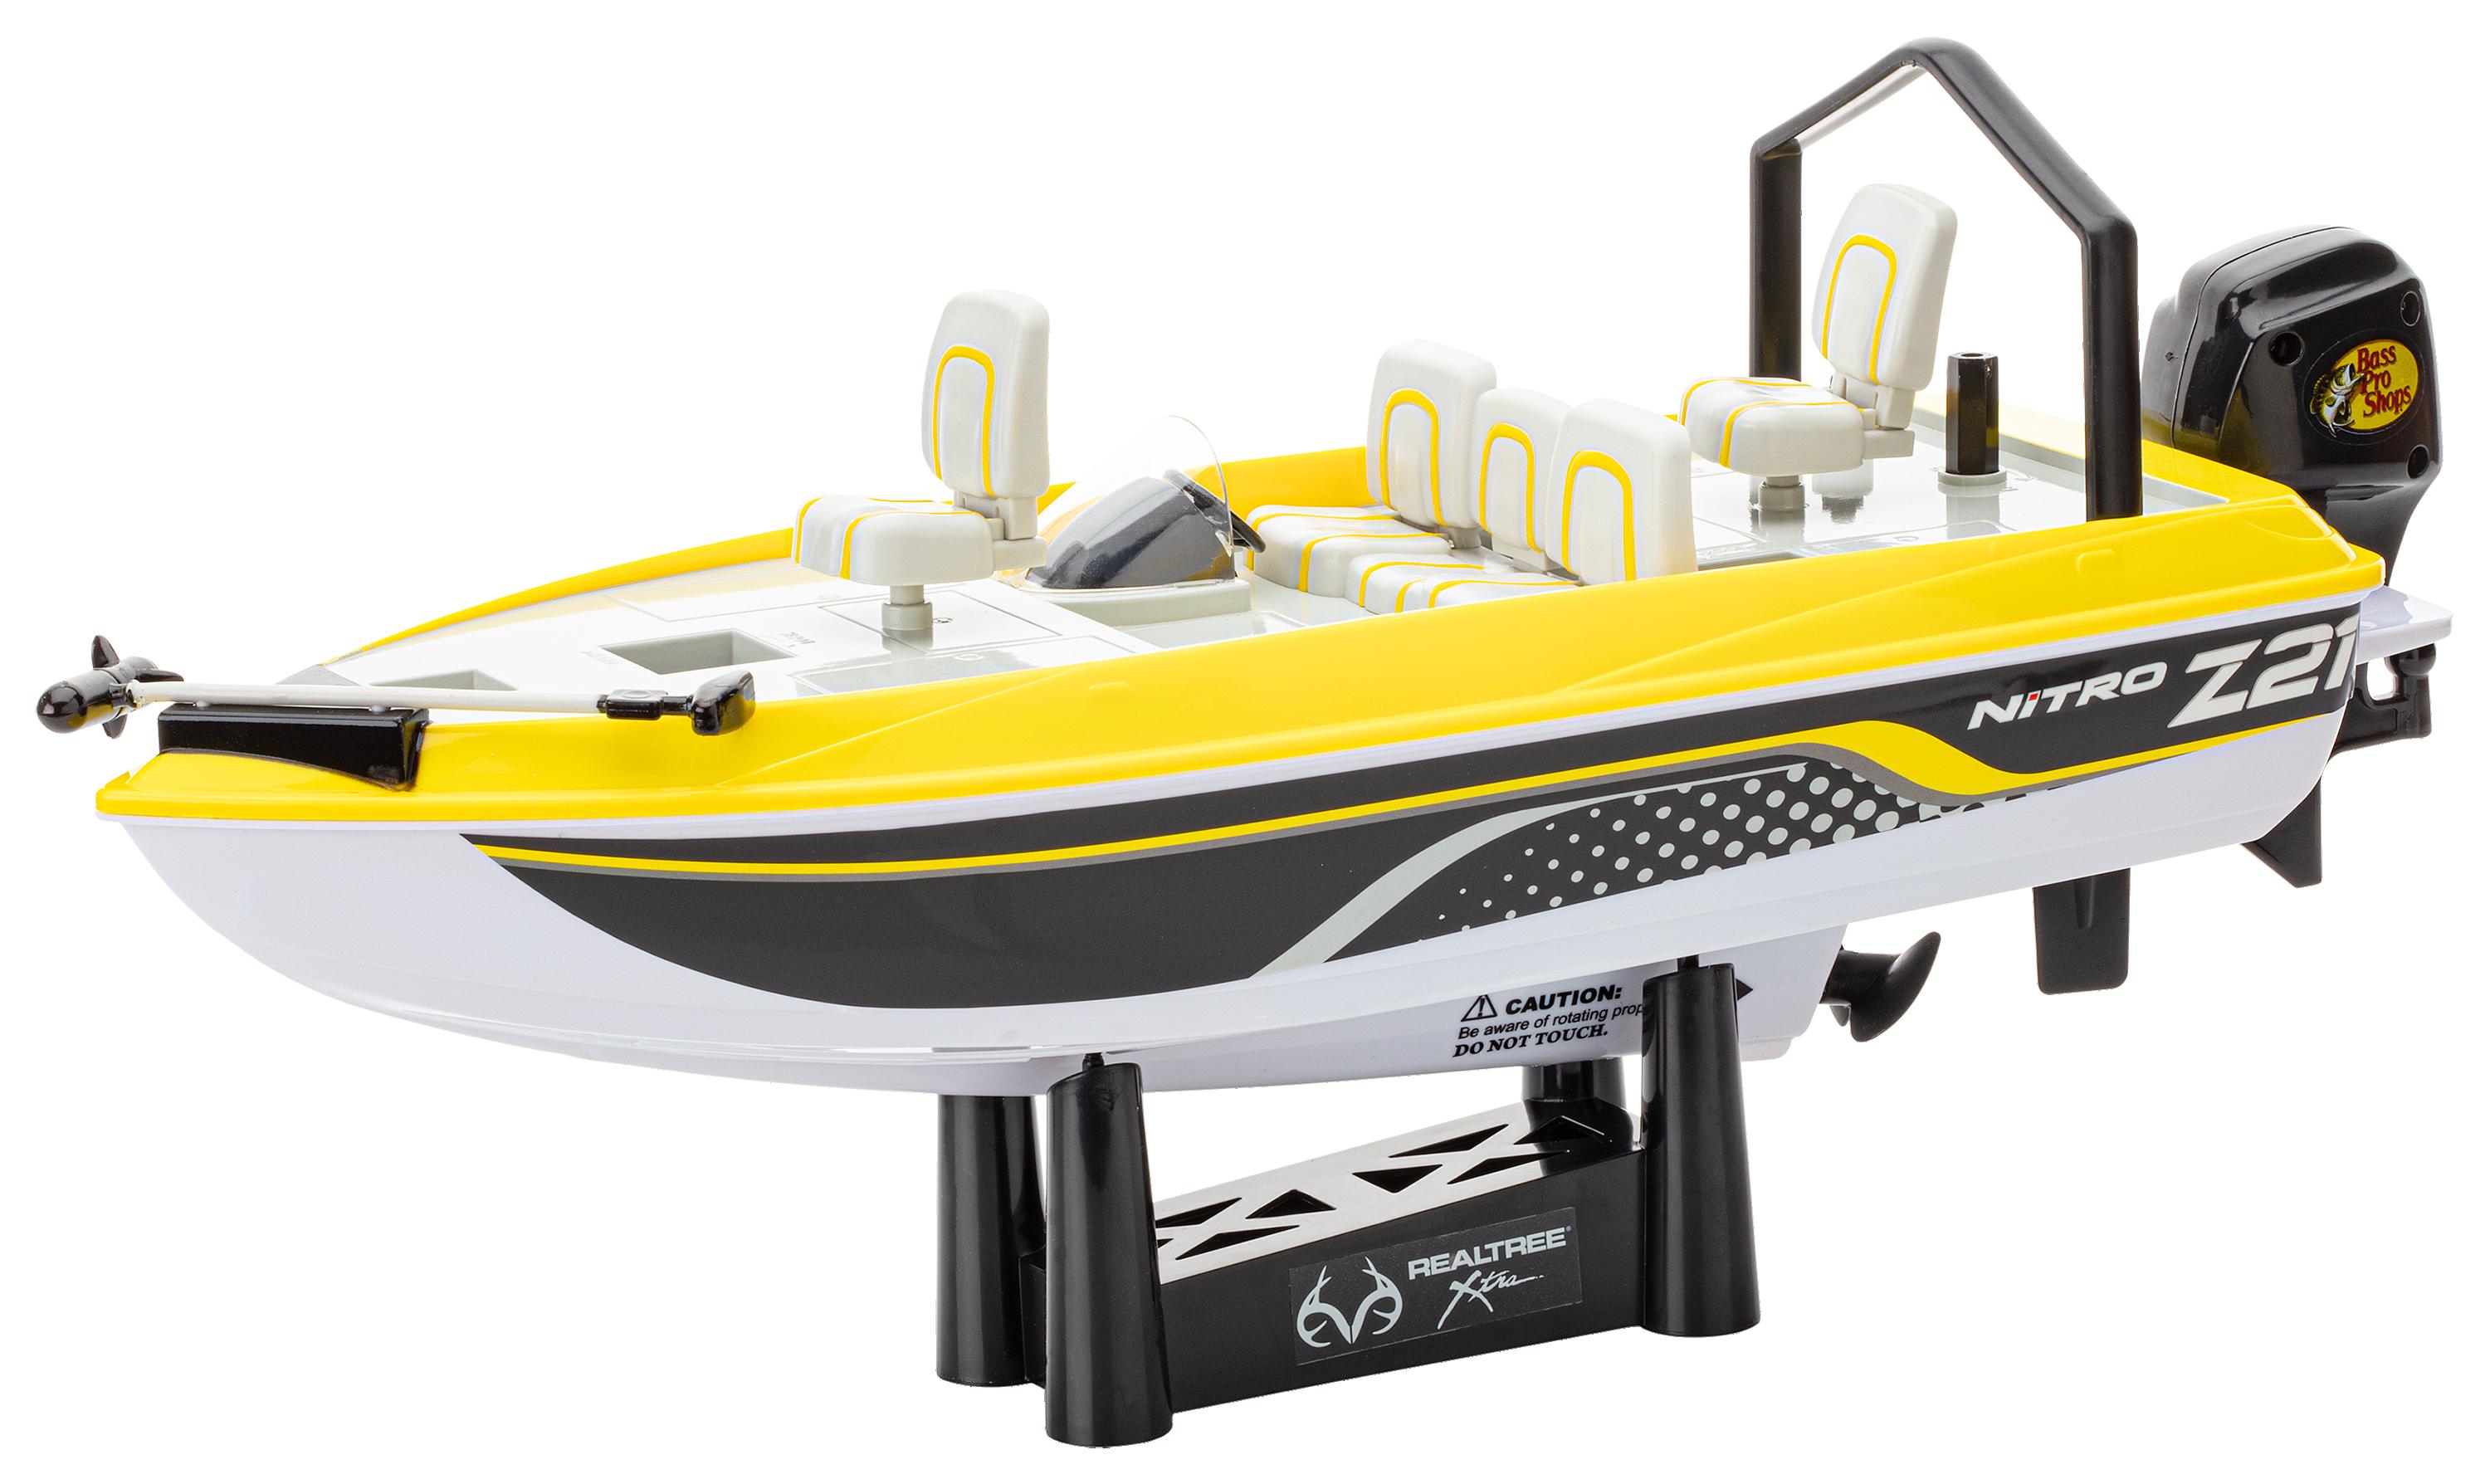 Best Nitro Rc Boat: Factors to Consider When Buying a Nitro RC Boat